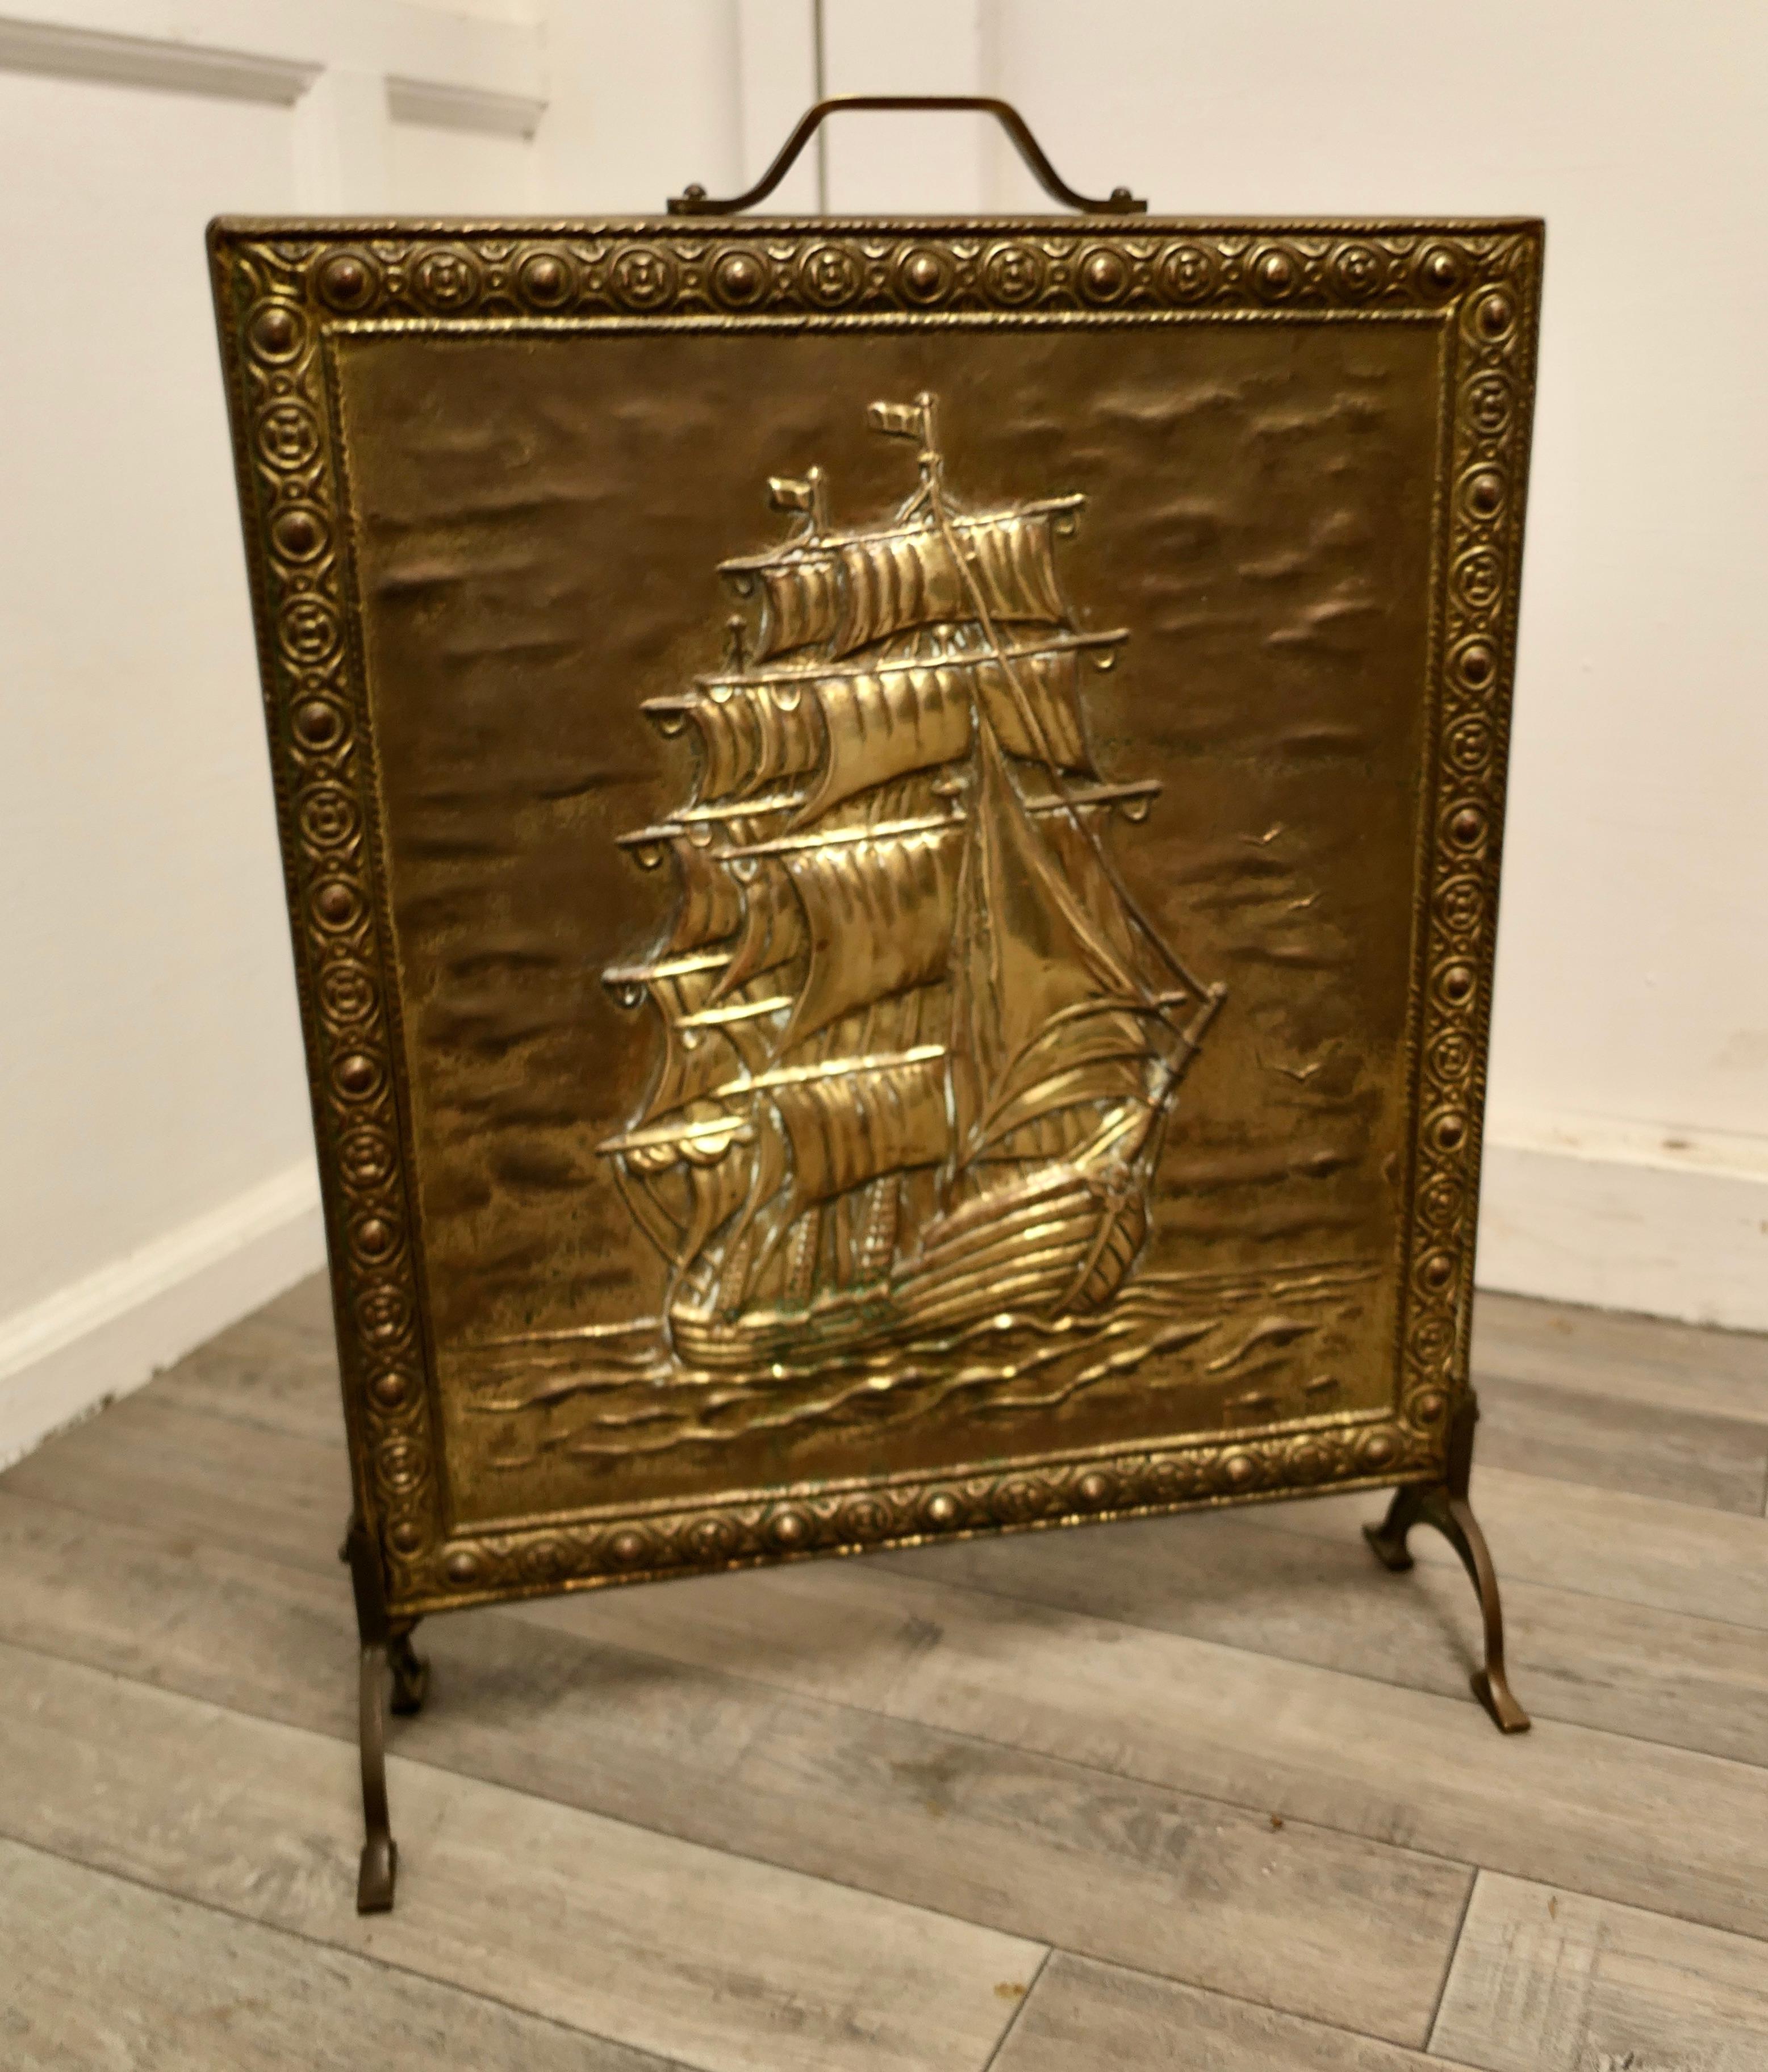 A large brass fire screen with the Cutty Sark

This is a large fire screen it has a very attractive picture on the front of the famous cutty sark in full sail
The screen is good quality and made in brass with a handle to the top, 
The screen is